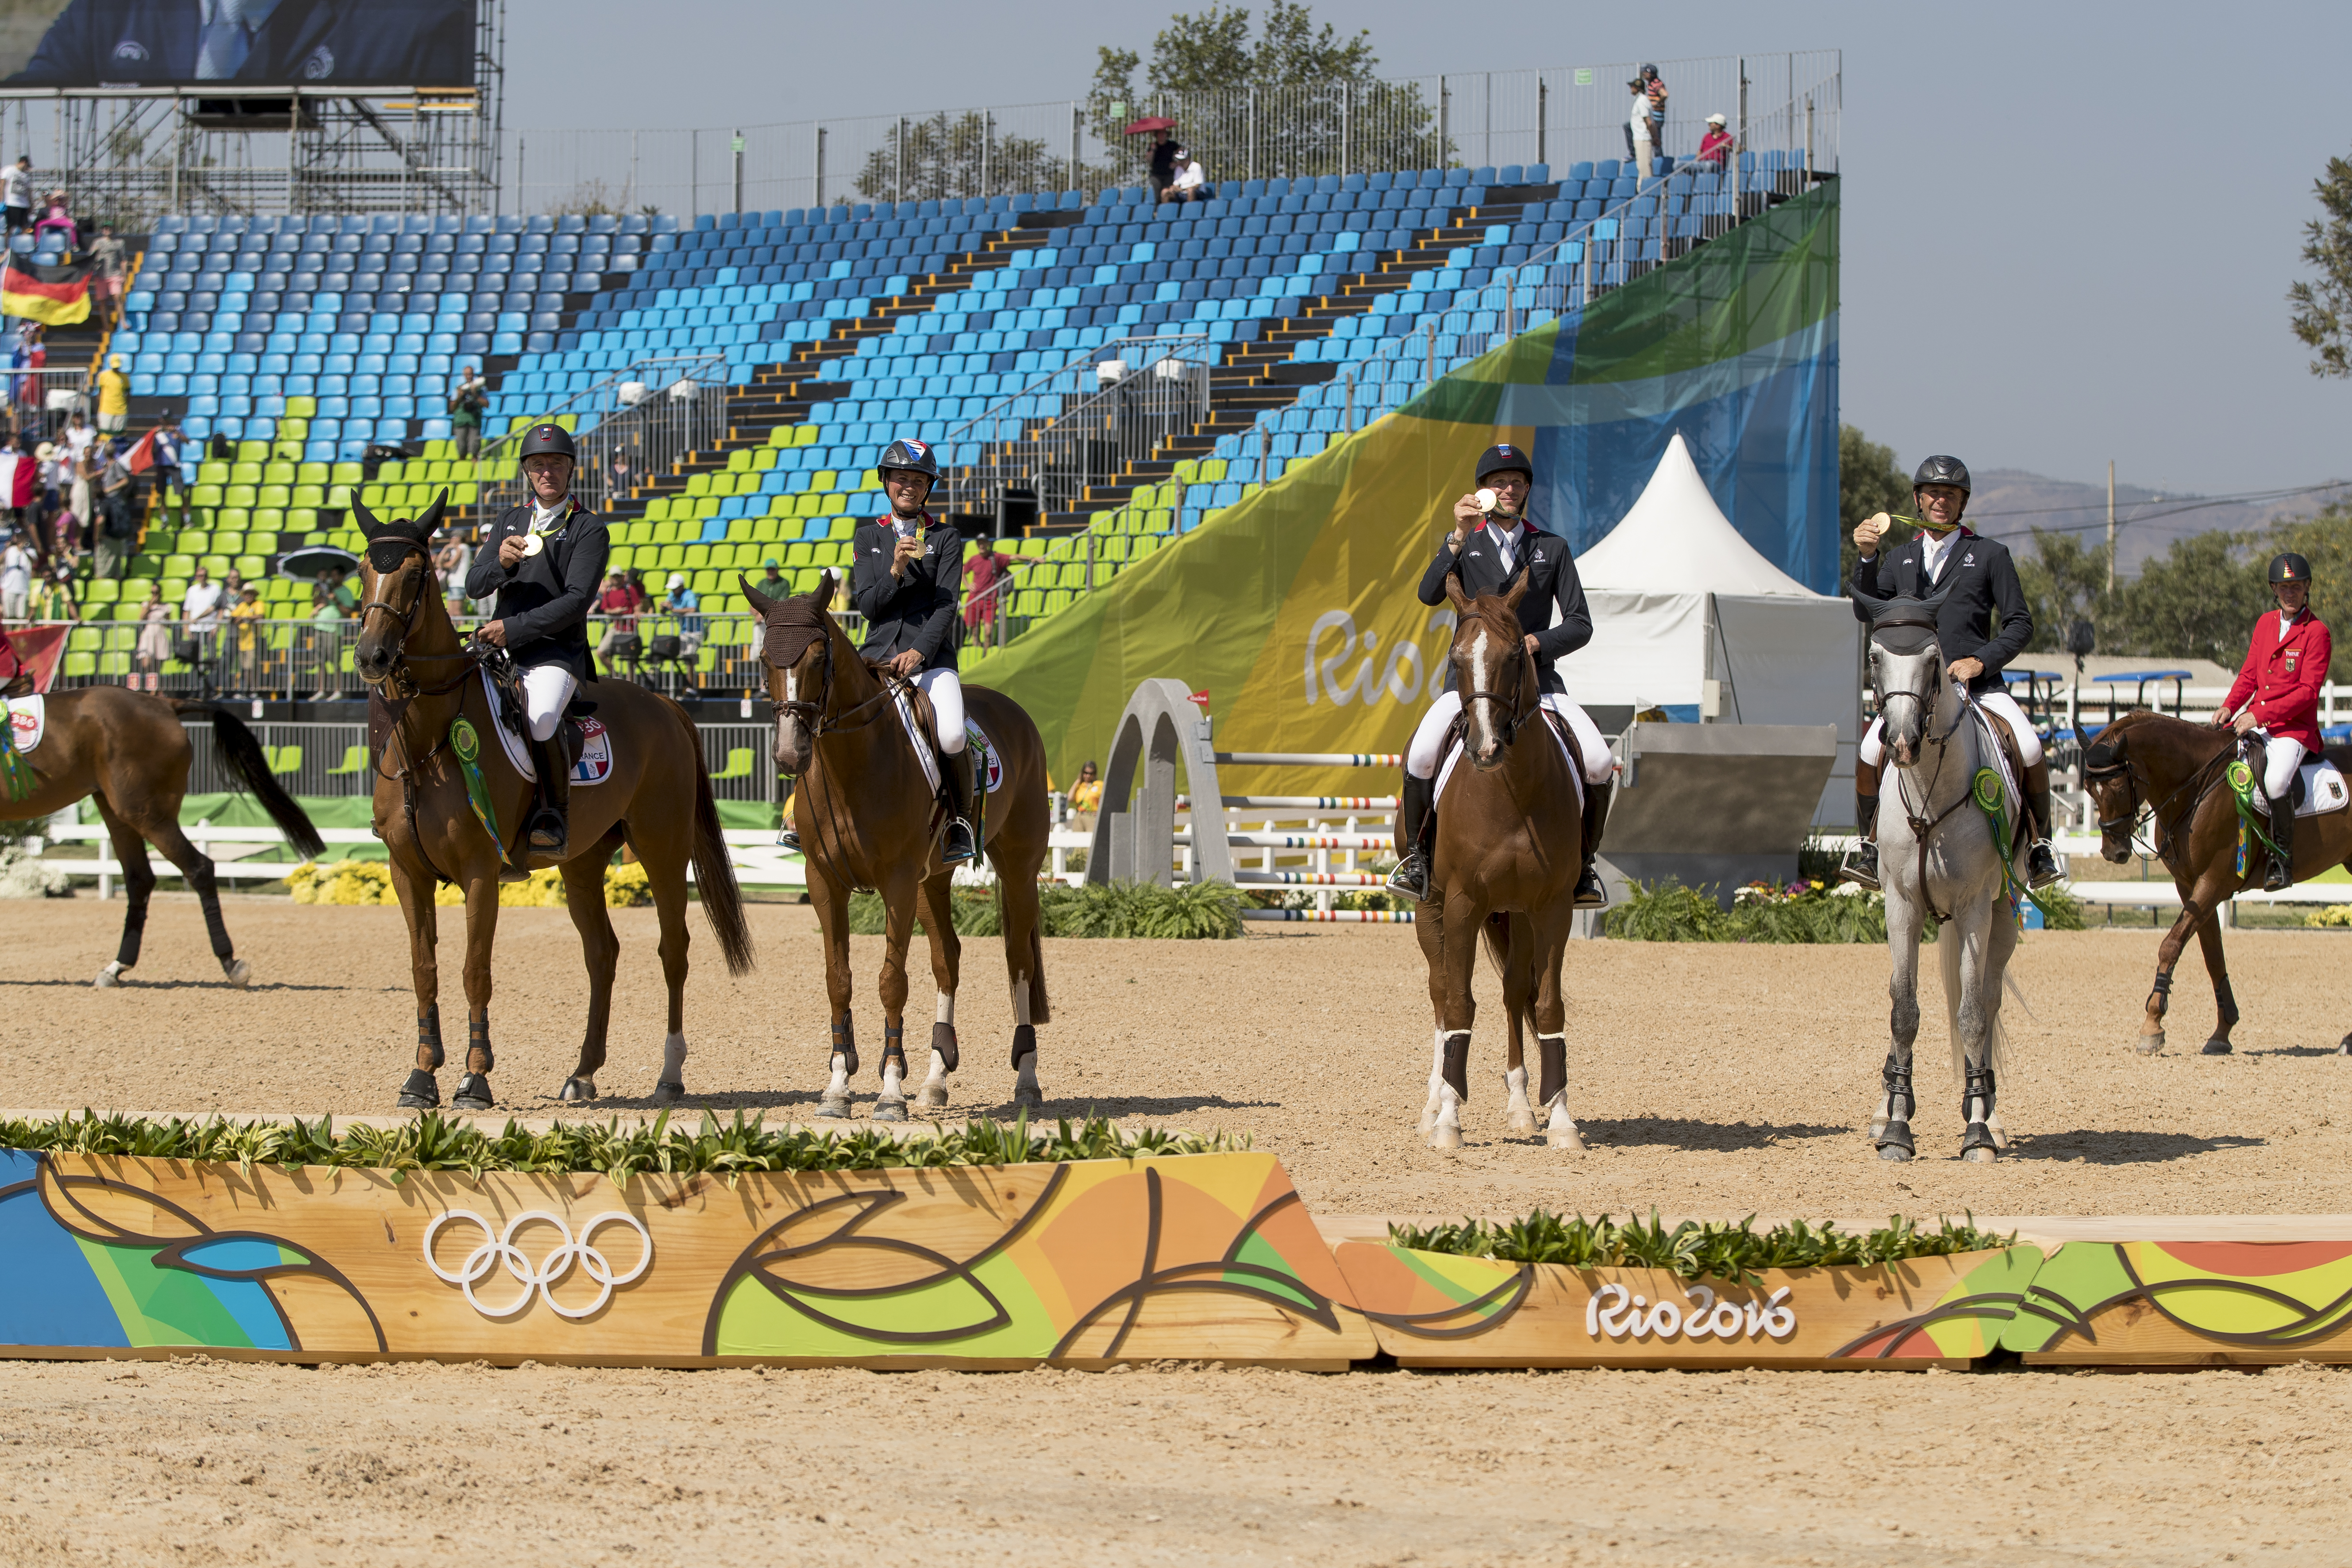 Olympic gold for REVEUR DE HURTEBISE member of the French team (picture (c) Hippofoto)